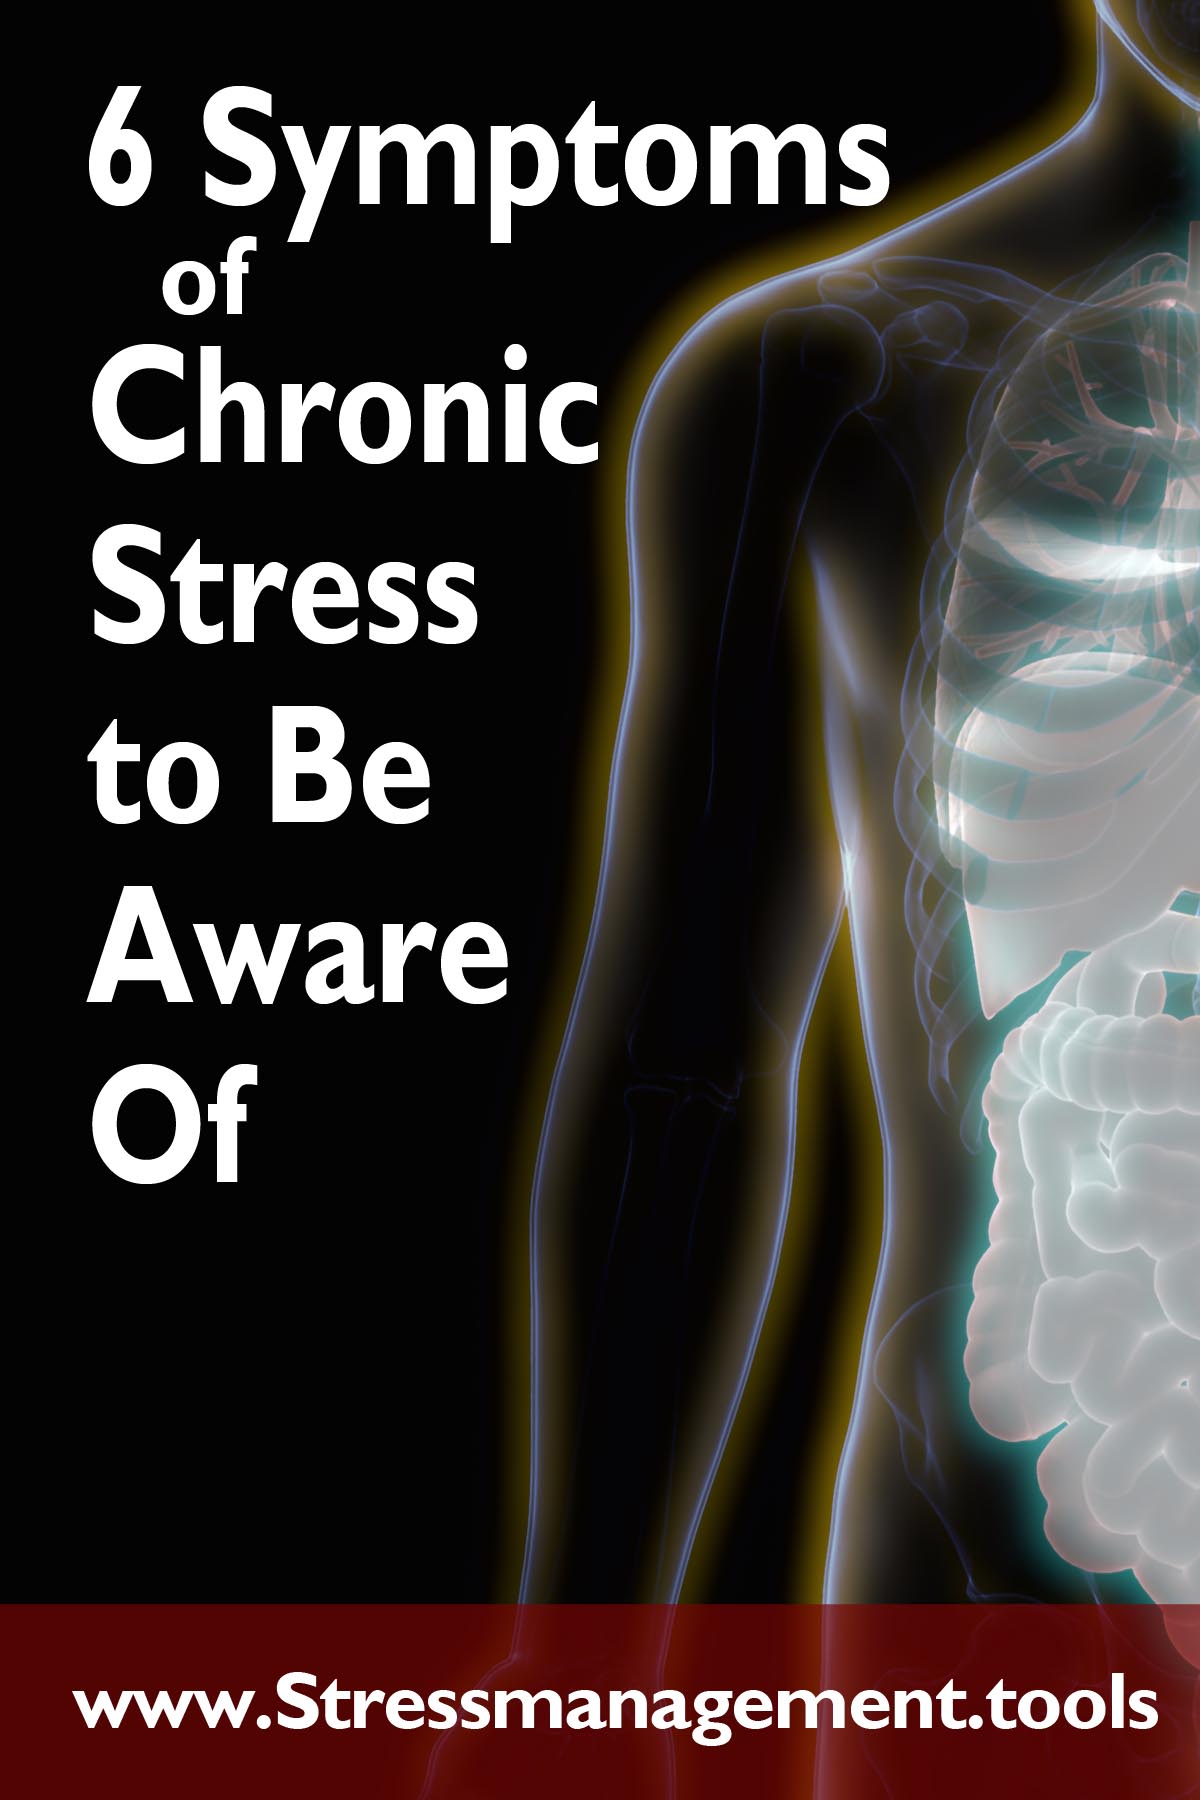 6 Symptoms of Chronic Stress to Be Aware Of